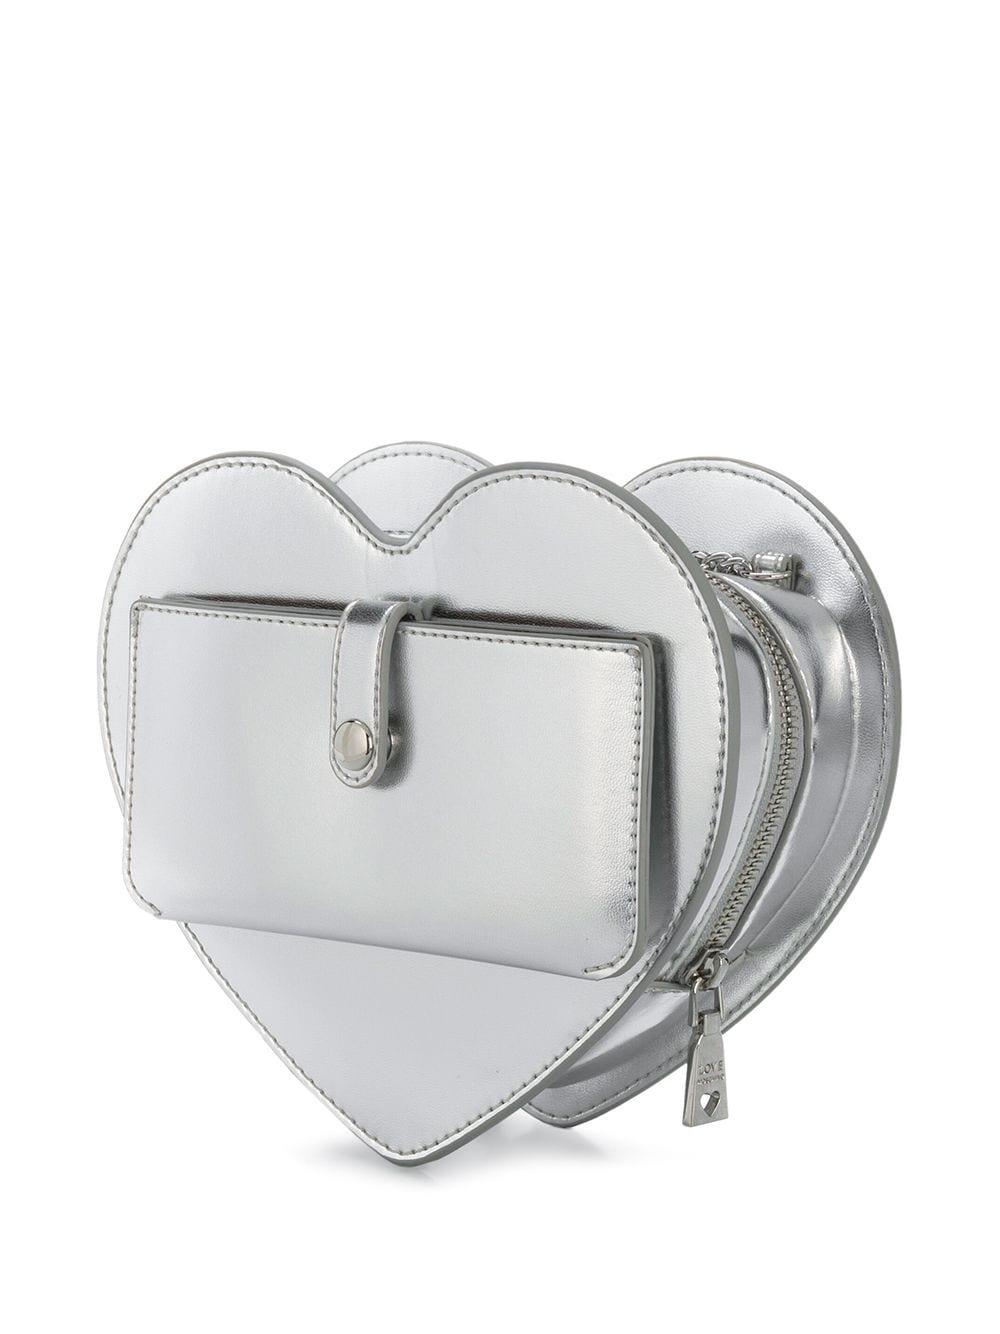 Moschino Patent Leather Pill Shoulder Bag - Silver Shoulder Bags, Handbags  - MOS72553